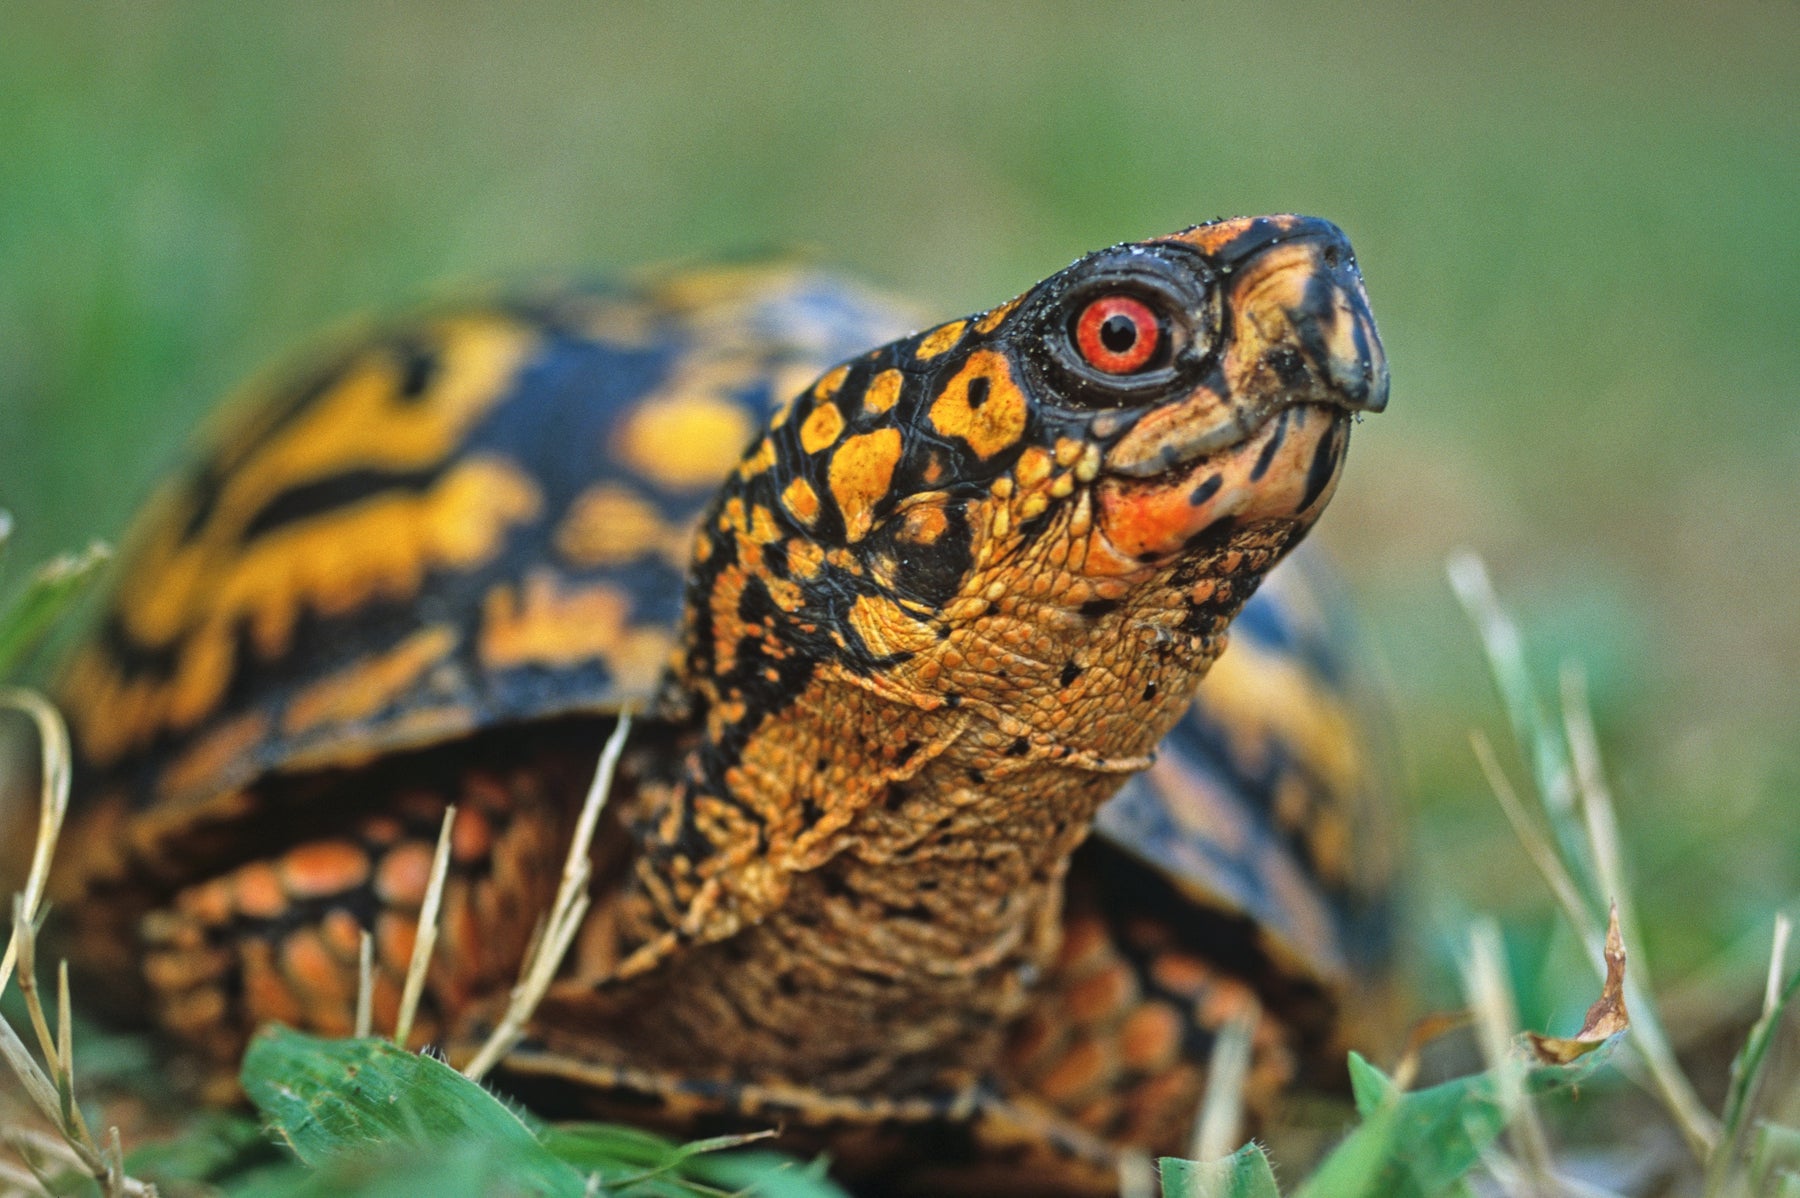 How to Care for Your Eastern Box Turtle